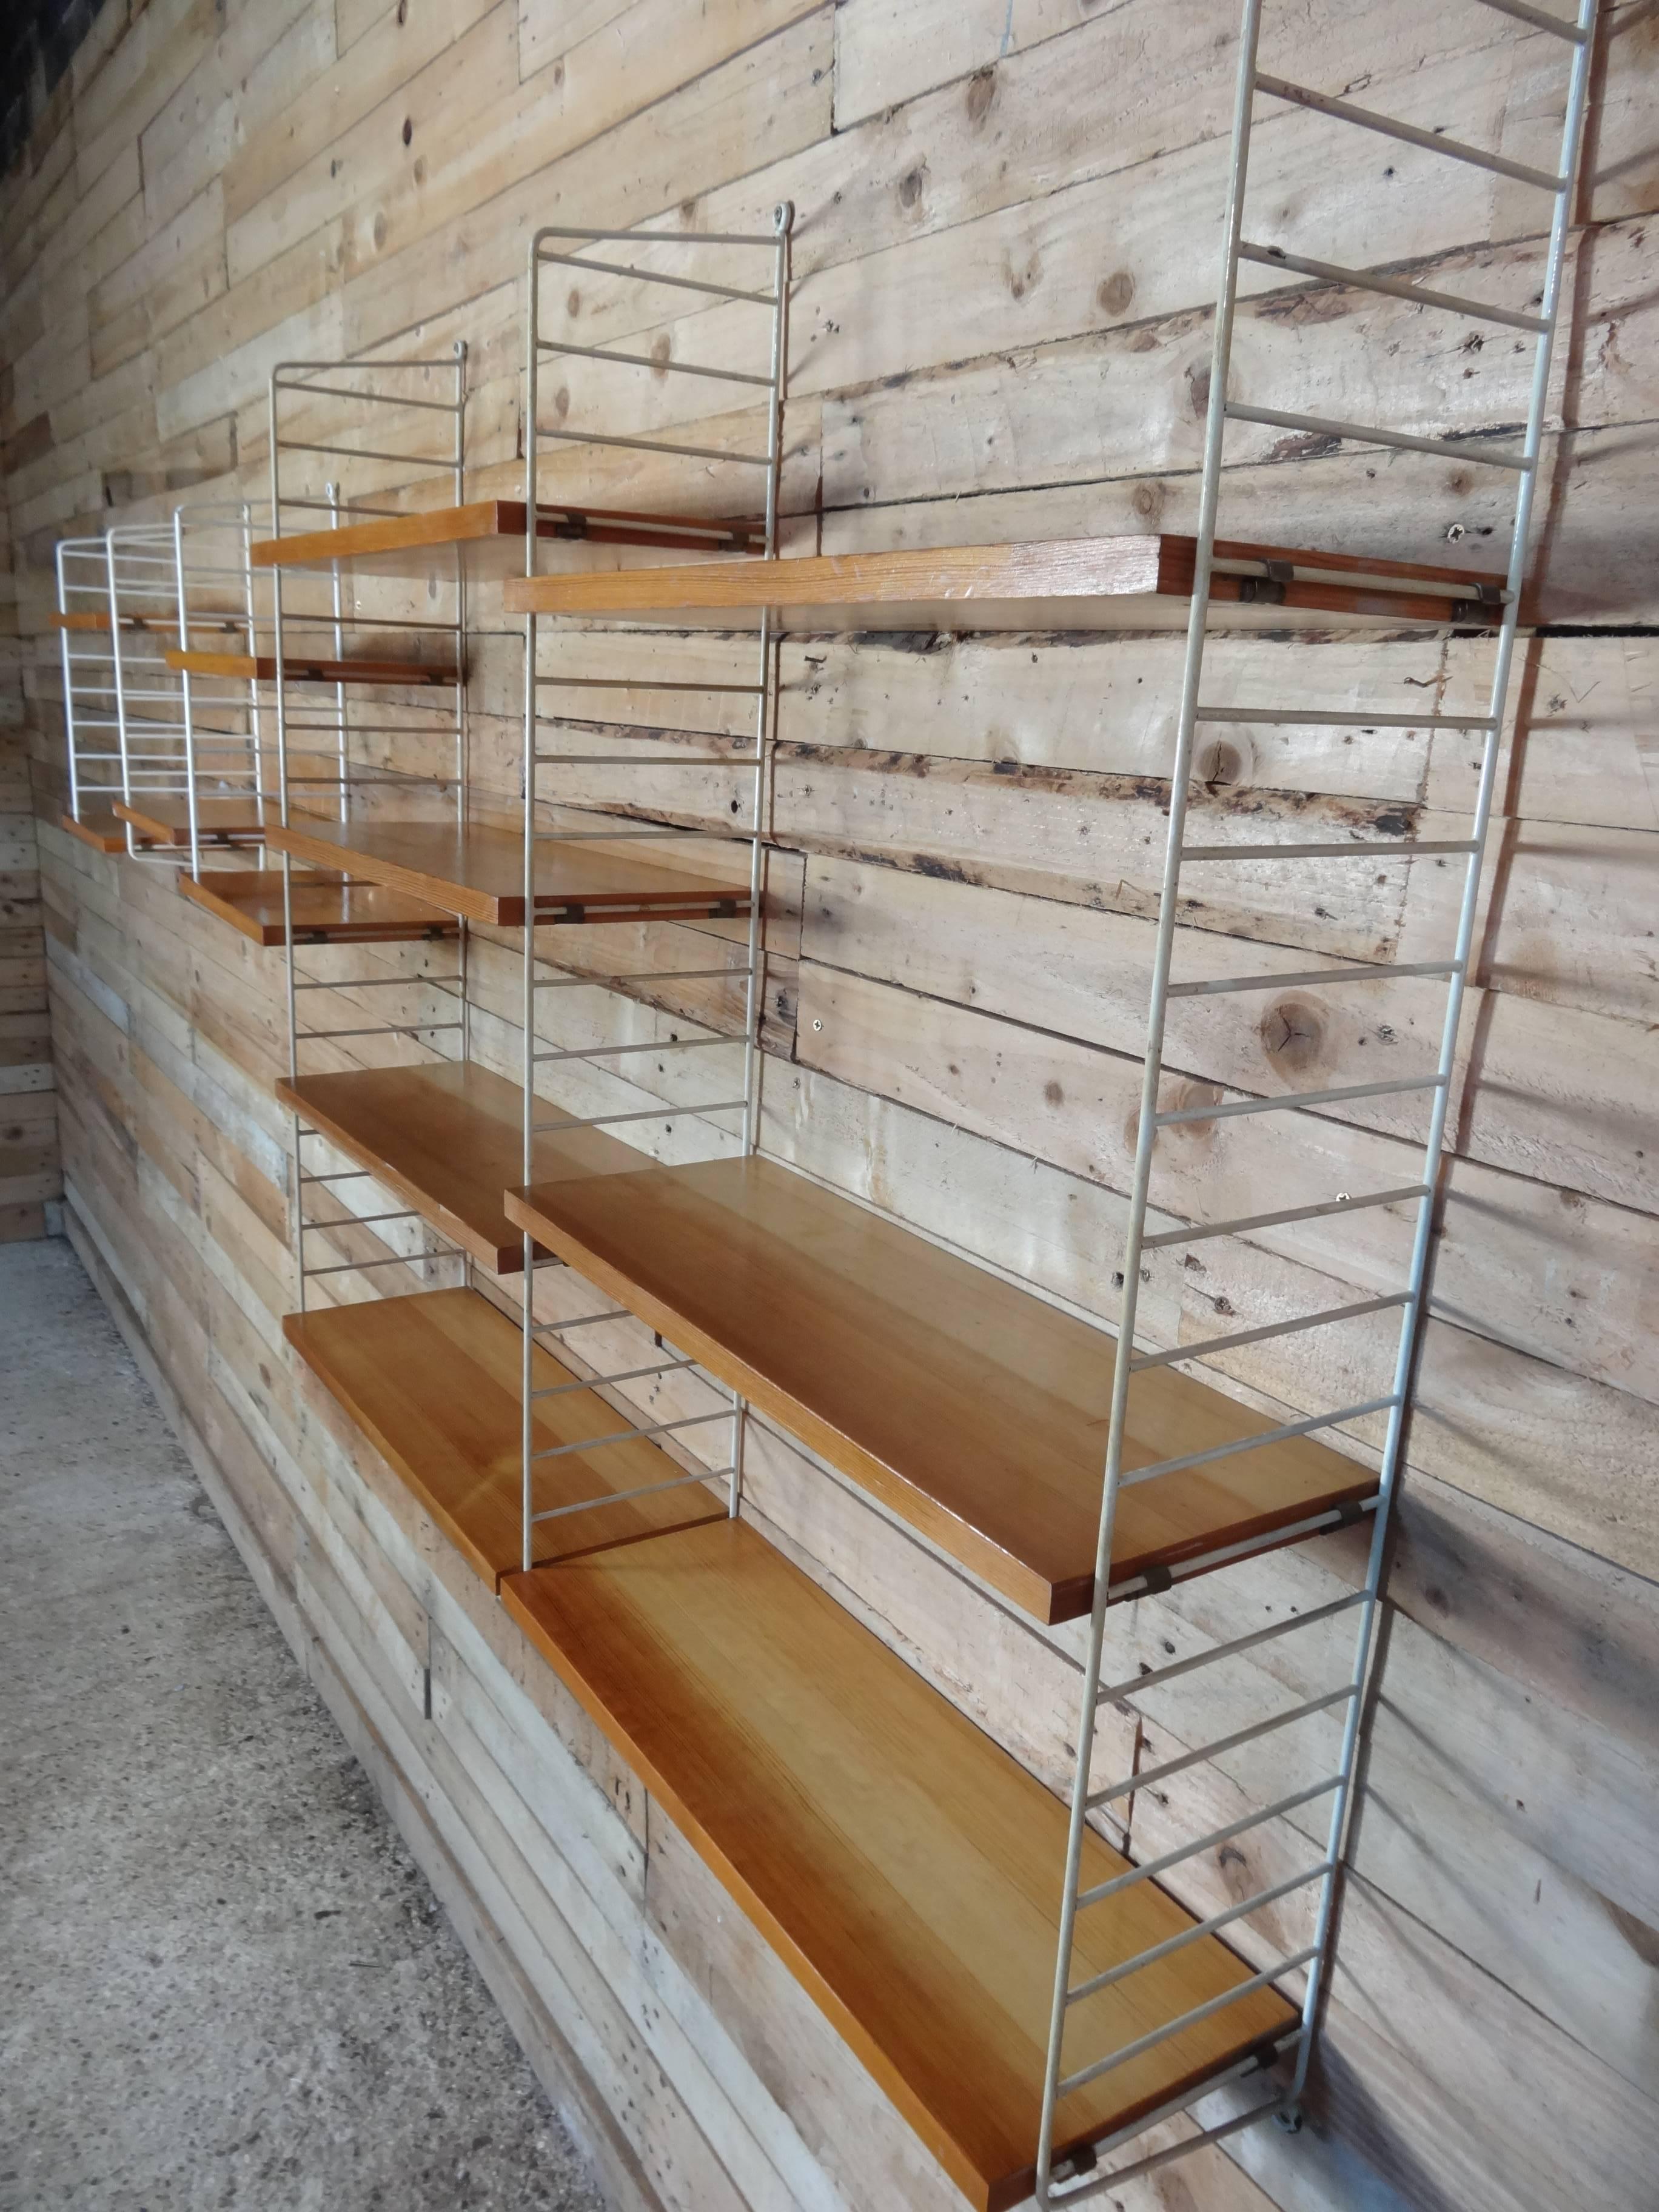 Large retro vintage shelving unit by Nisse Strinning for String, 1960s the string wall system was designed in 1949 and over the years has evolved from being innovative to one of the staples of Scandinavian design. Each component of the system is